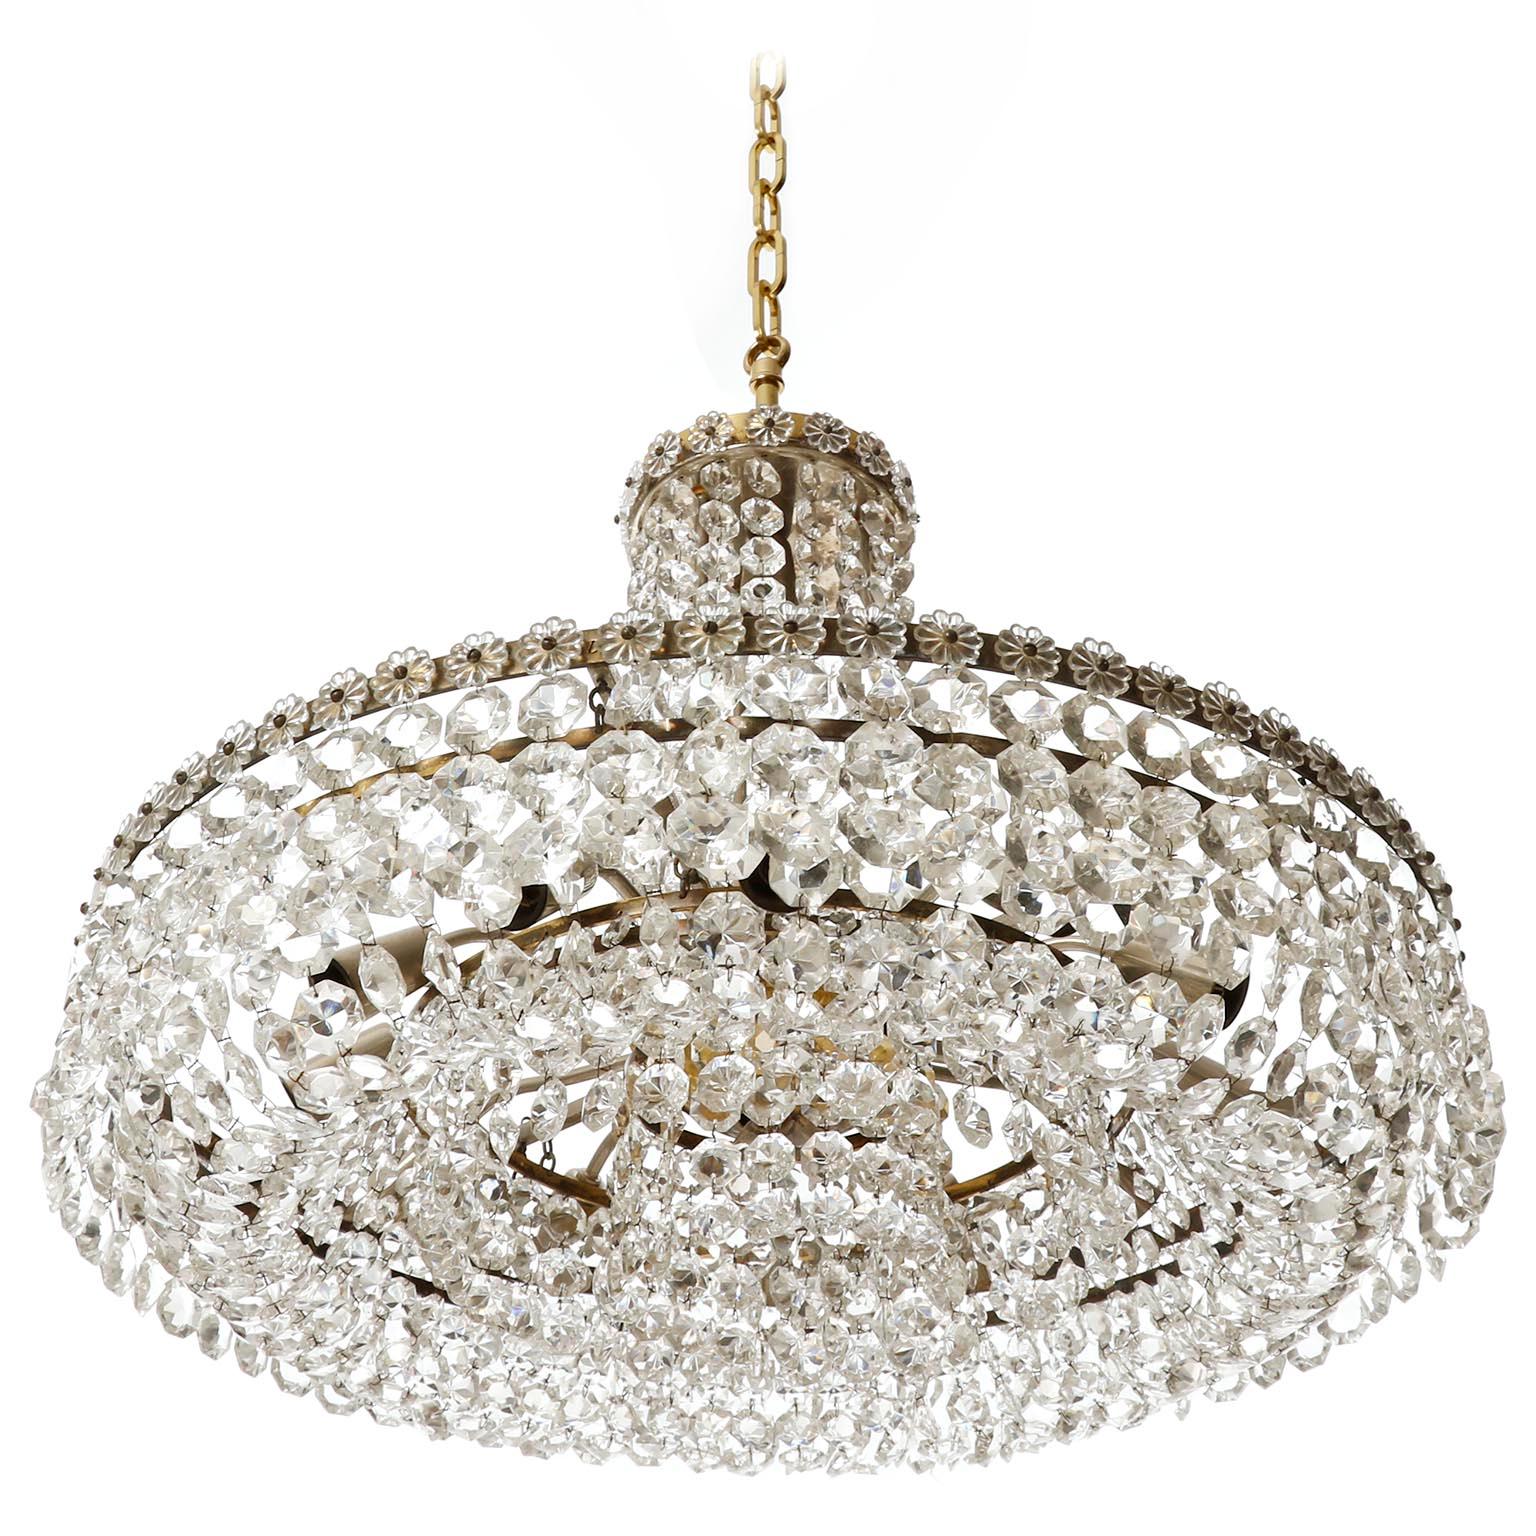 Mid-20th Century Bakalowits Chandelier Pendant Light No. 3330, Brass Nickel Glass, 1960s For Sale